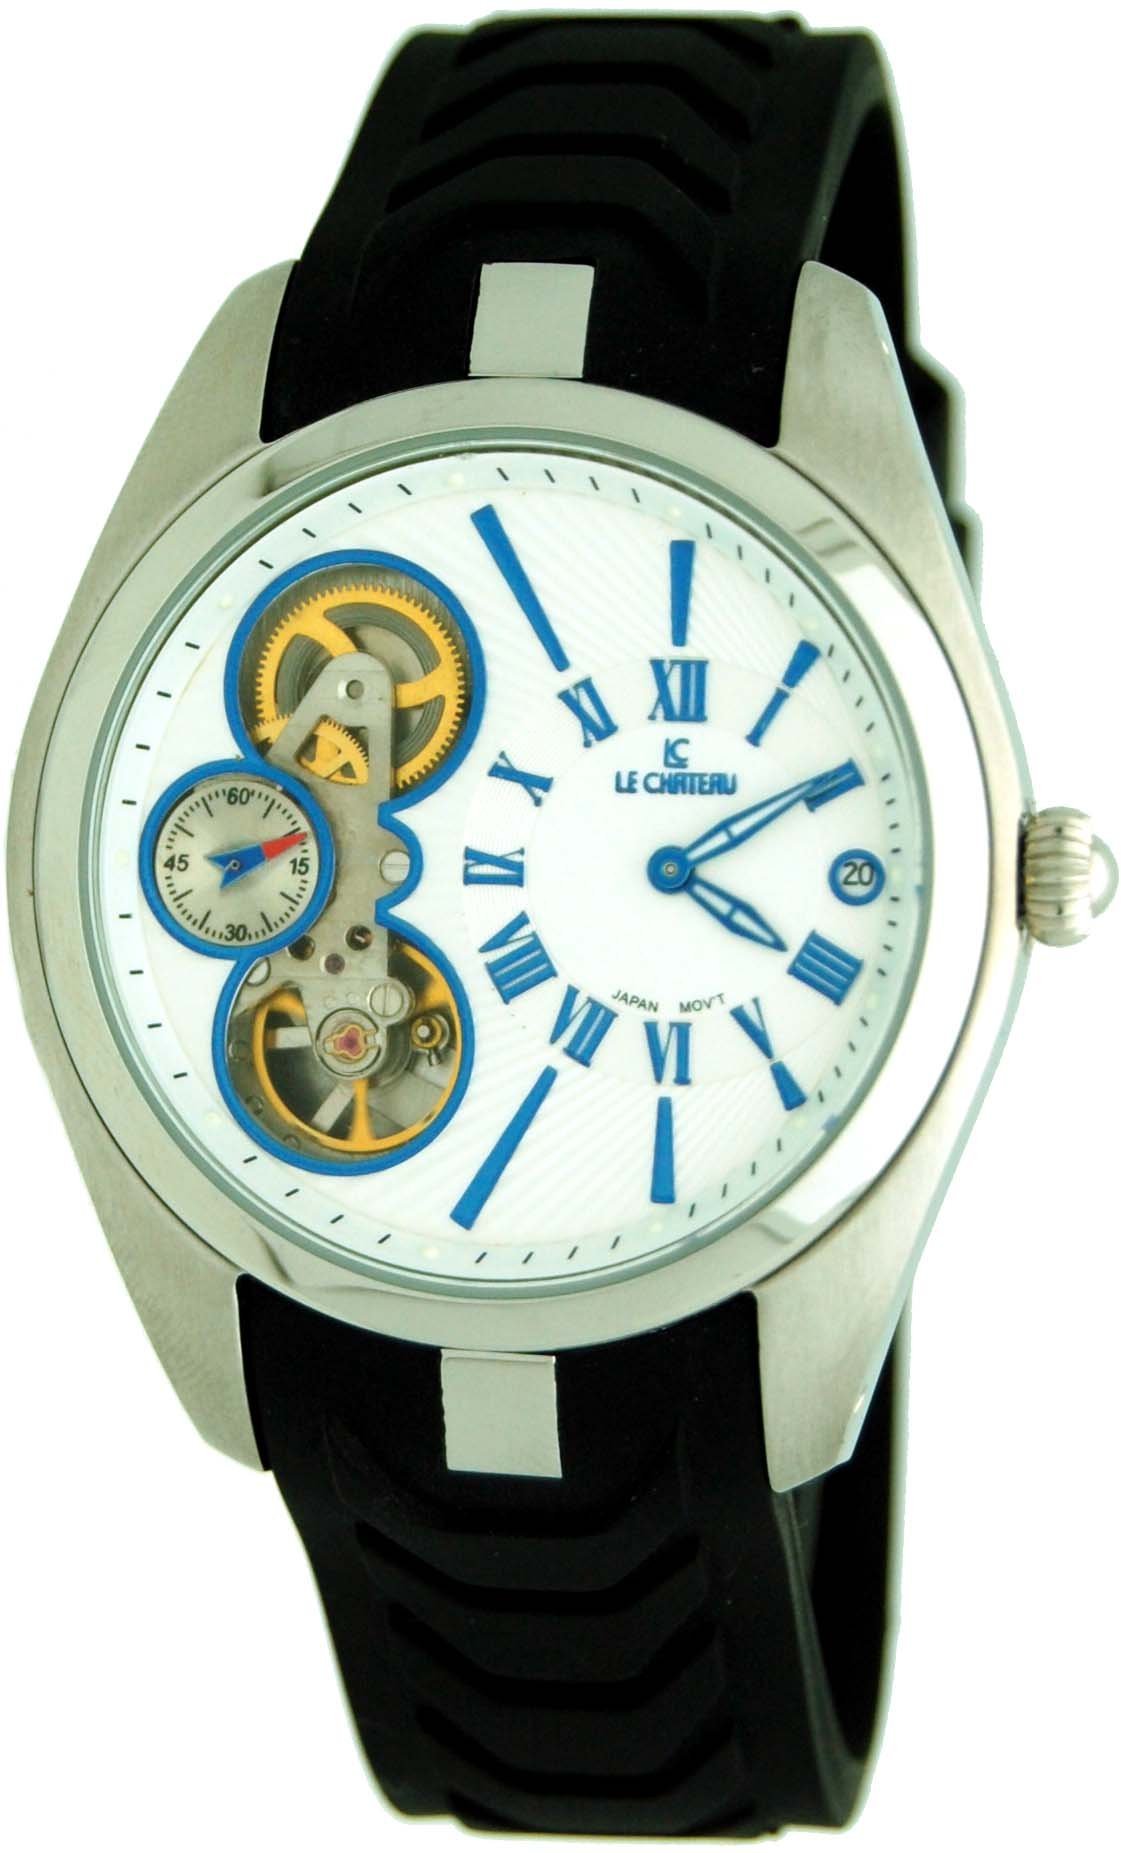 Le Chateau Men's Skeleton Quartz Watch with Rubber Band and Date Display #5704